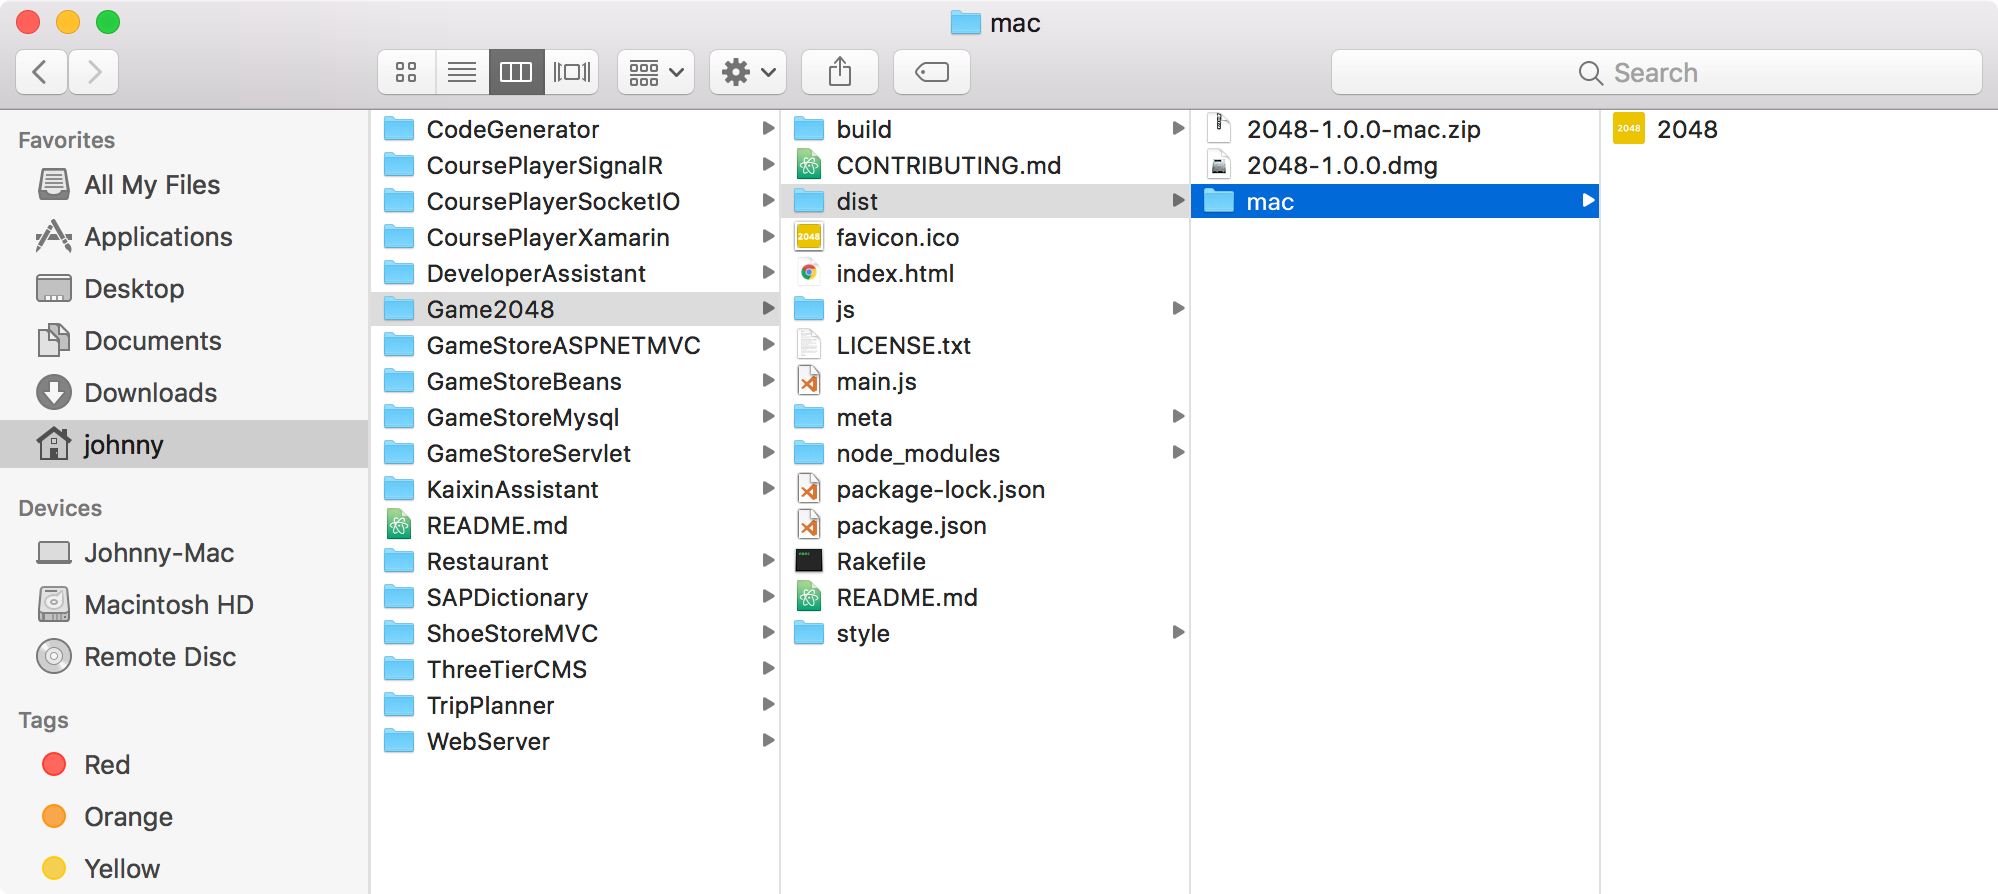 how to create a zip file on a mac 2048